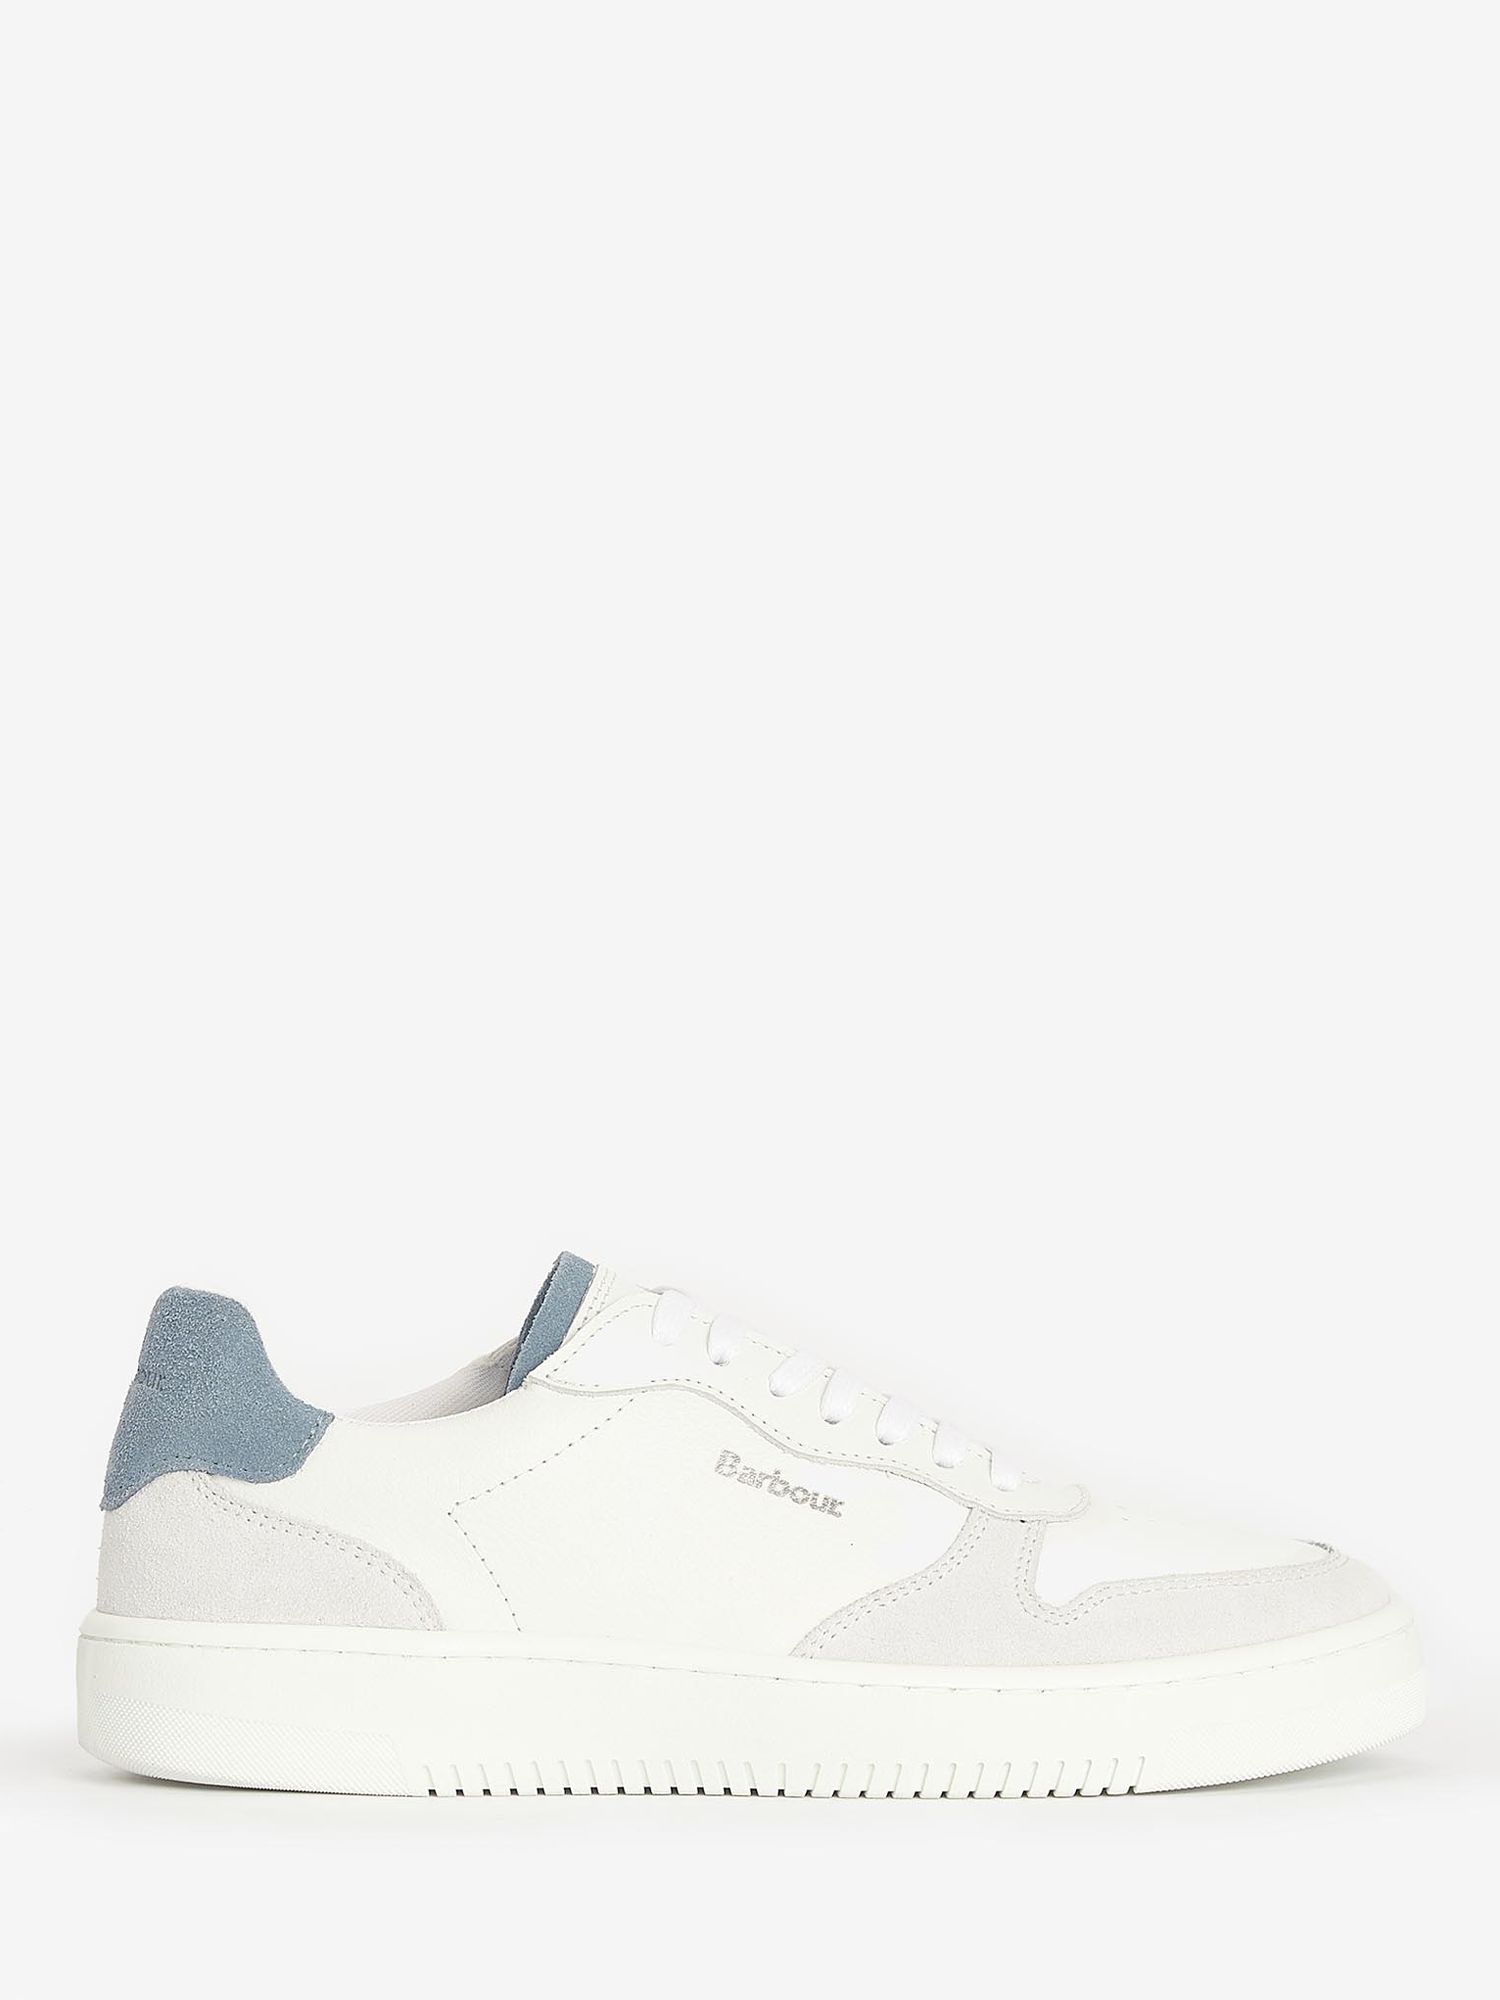 Barbour Celeste Leather and Suede Trainers, White/Chambray at John ...